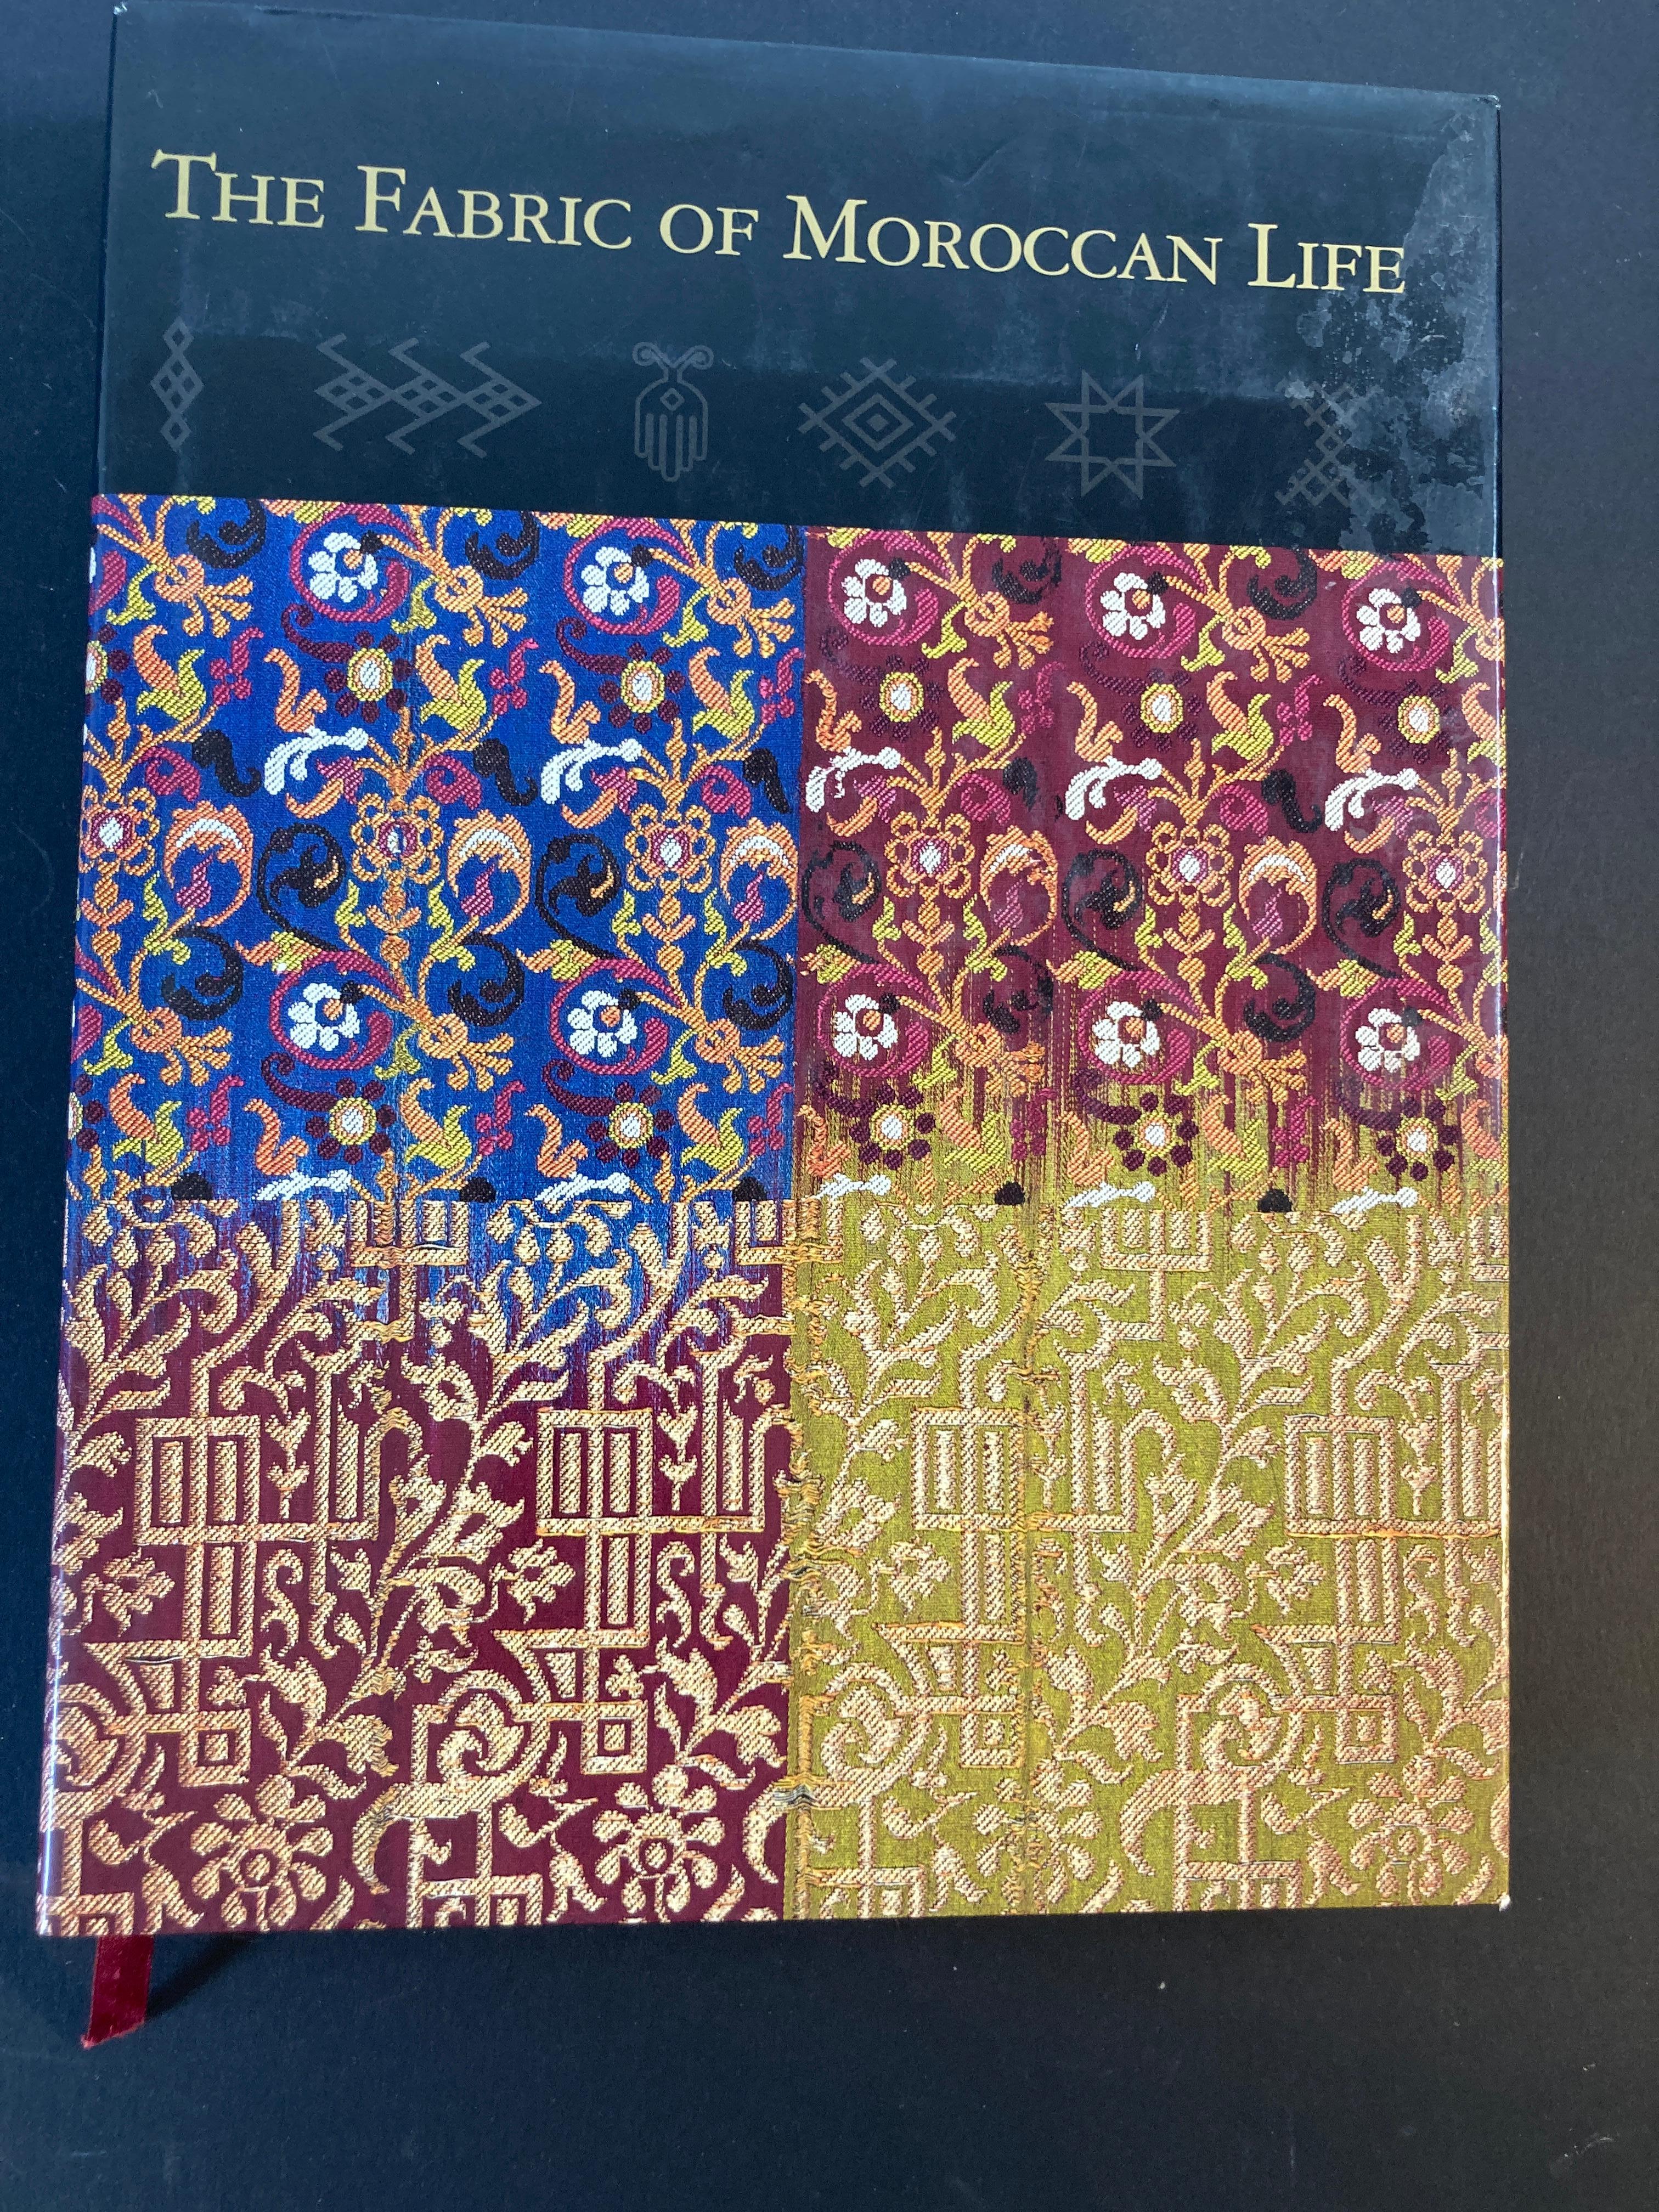 The Fabric of Moroccan Life Book by Ivo Grammet and Niloo Imami Paydar.
By Indianapolis Museum of Art.
For centuries, the people of Morocco have been producing magnificent embroideries, pile rugs, and flatweaves. The Fabric of Moroccan Life